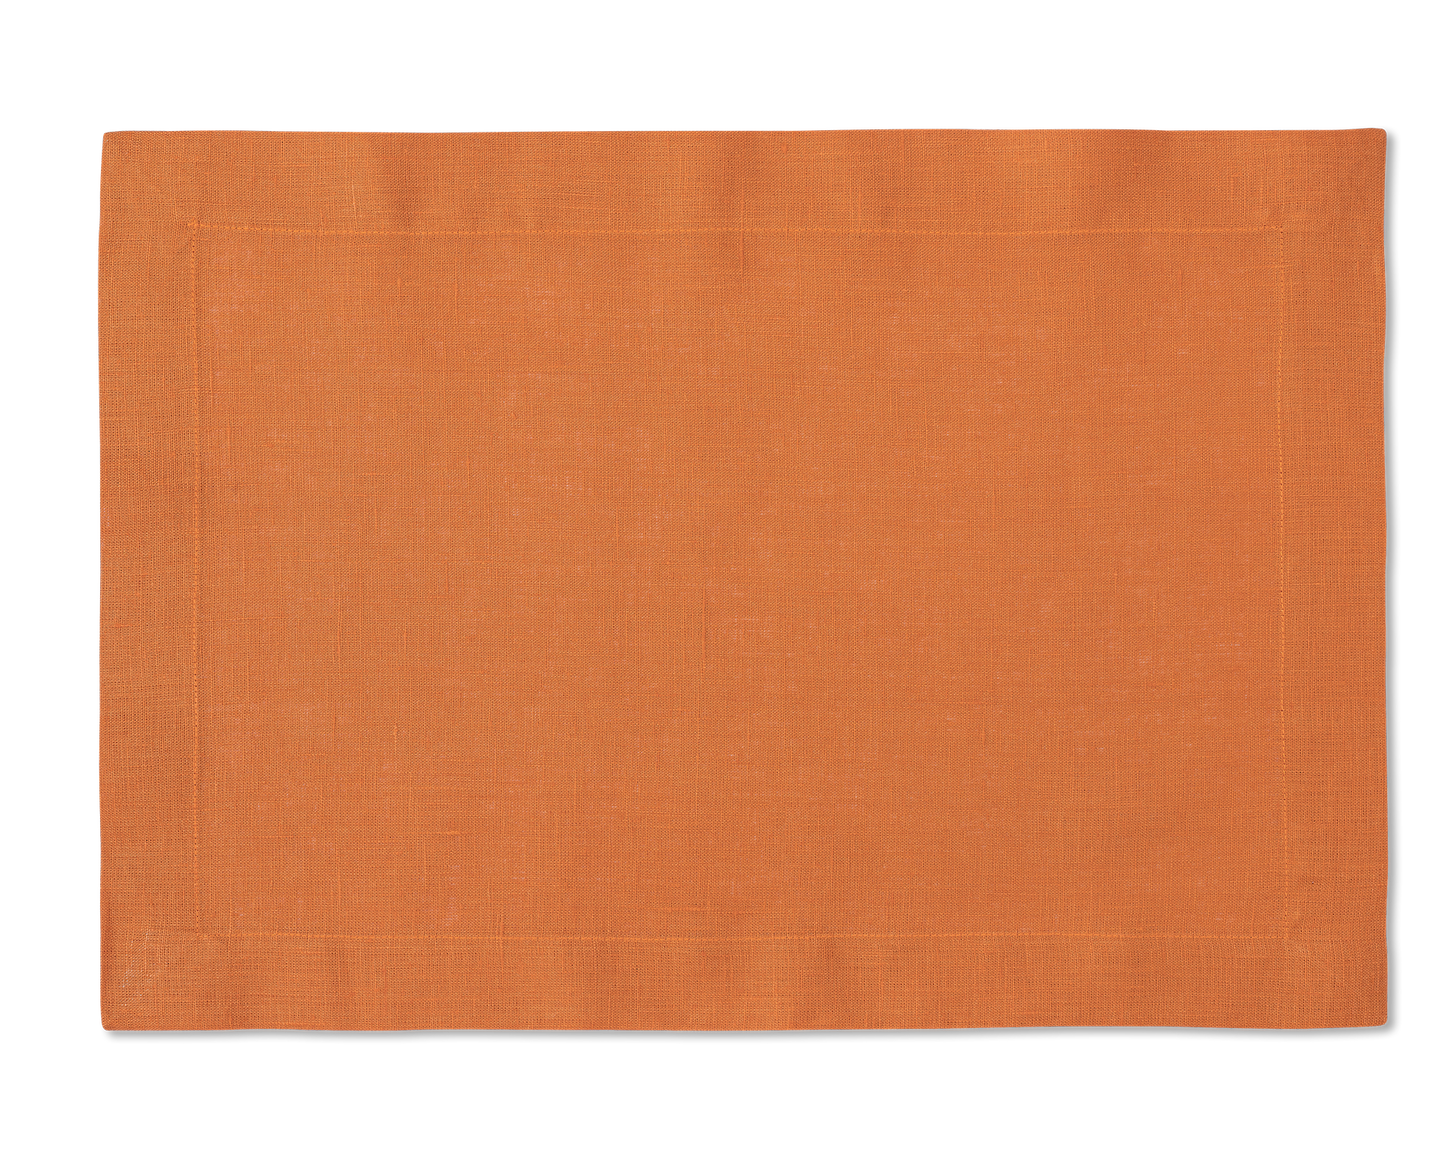 A linen placemat in the color tangerine